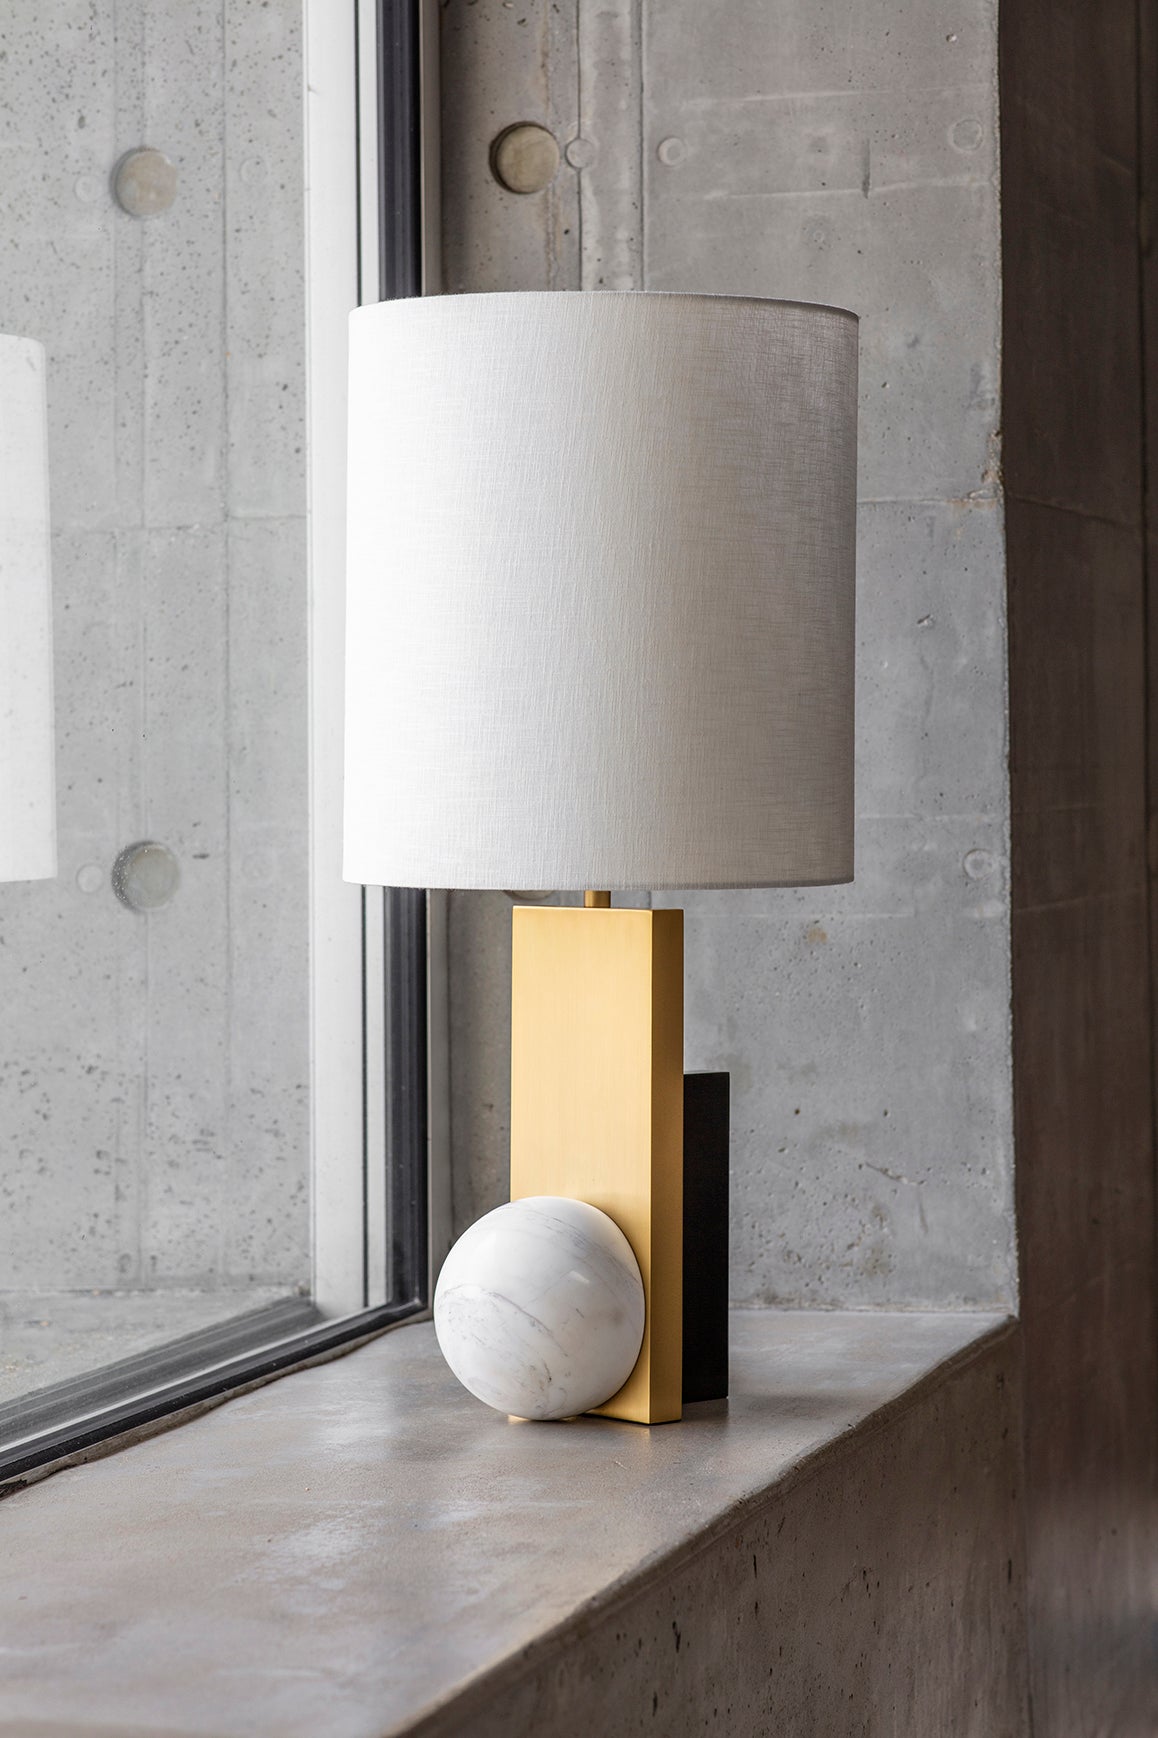 Triadic table lamp by Square in Circle, 2022
Dimensions: H 72 cm x Base W 23 x D 15 cm
Shade: H 35 x D 35 cm
Materials: Brushed brass, white marble, dark bronze, white cotton shade

The Triadic Table Lamp uses a simple combination of geometry.